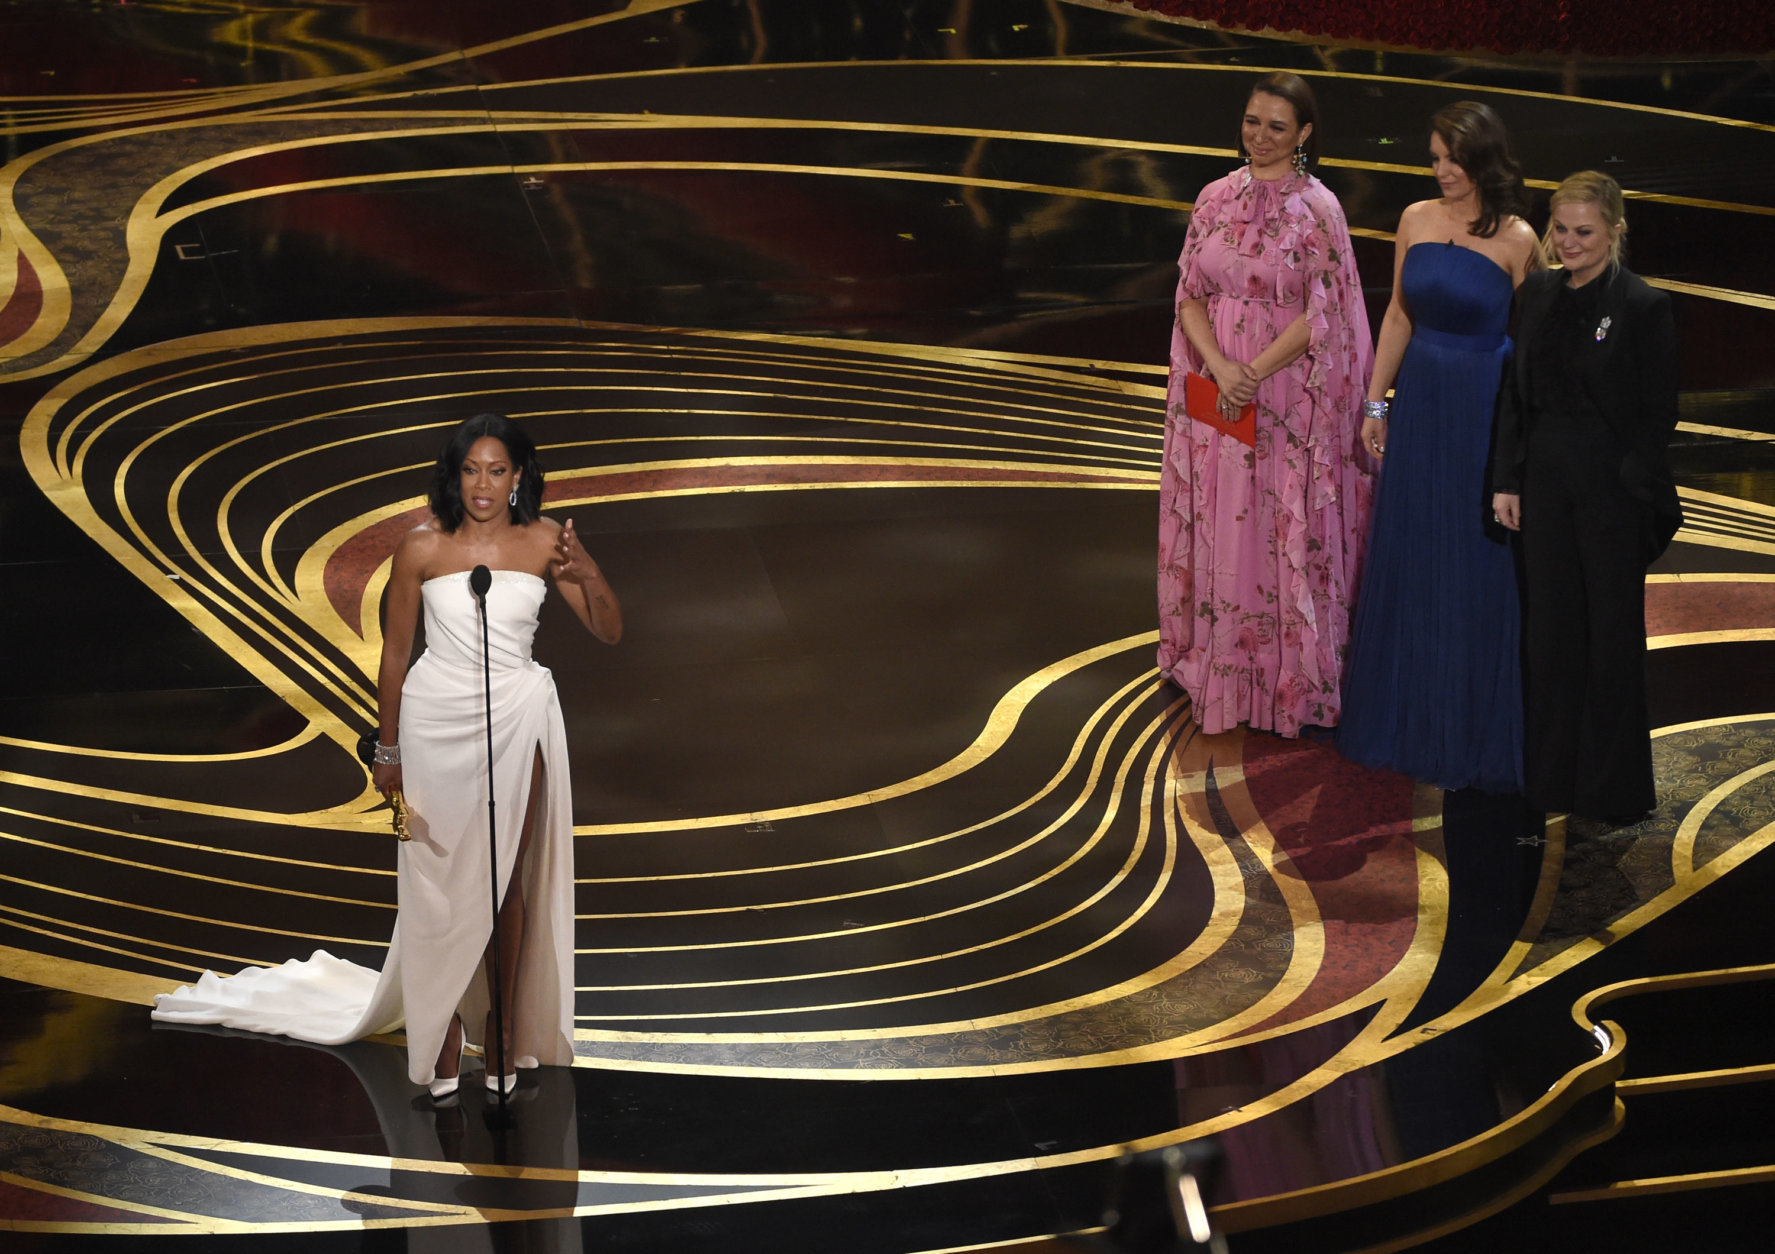 Regina King accepts the award for best performance by an actress in a supporting role for "If Beale Street Could Talk," as Maya Rudolph, from second left, Tina Fey and Amy Poehler look on at the Oscars on Sunday, Feb. 24, 2019, at the Dolby Theatre in Los Angeles. (Photo by Chris Pizzello/Invision/AP)